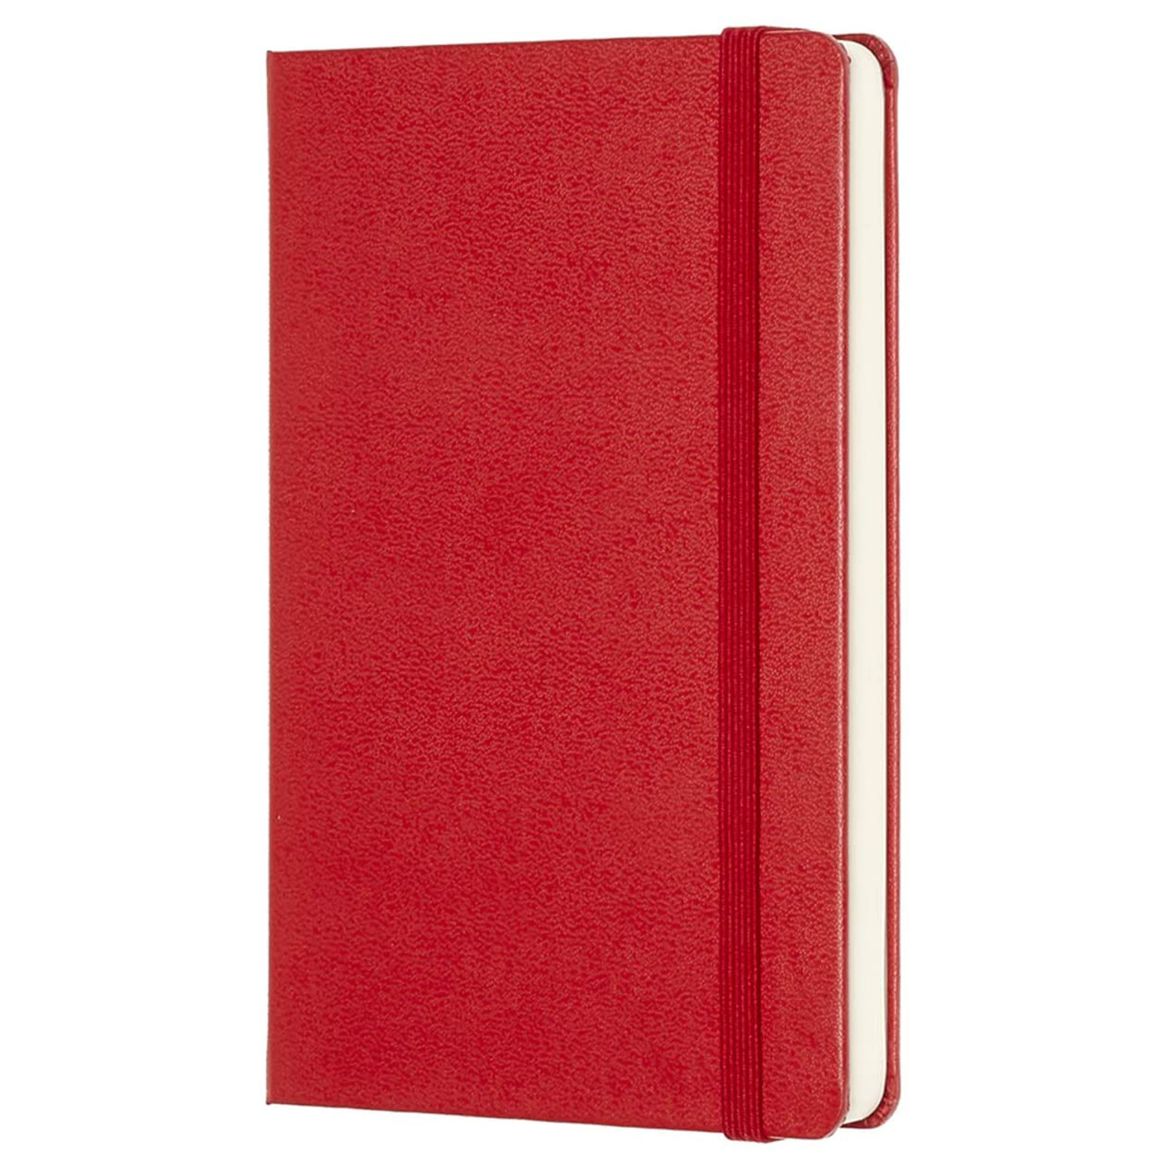 Moleskine Classic Notebook, Large, Plain, Red, Hard Cover (5 x 8.25)